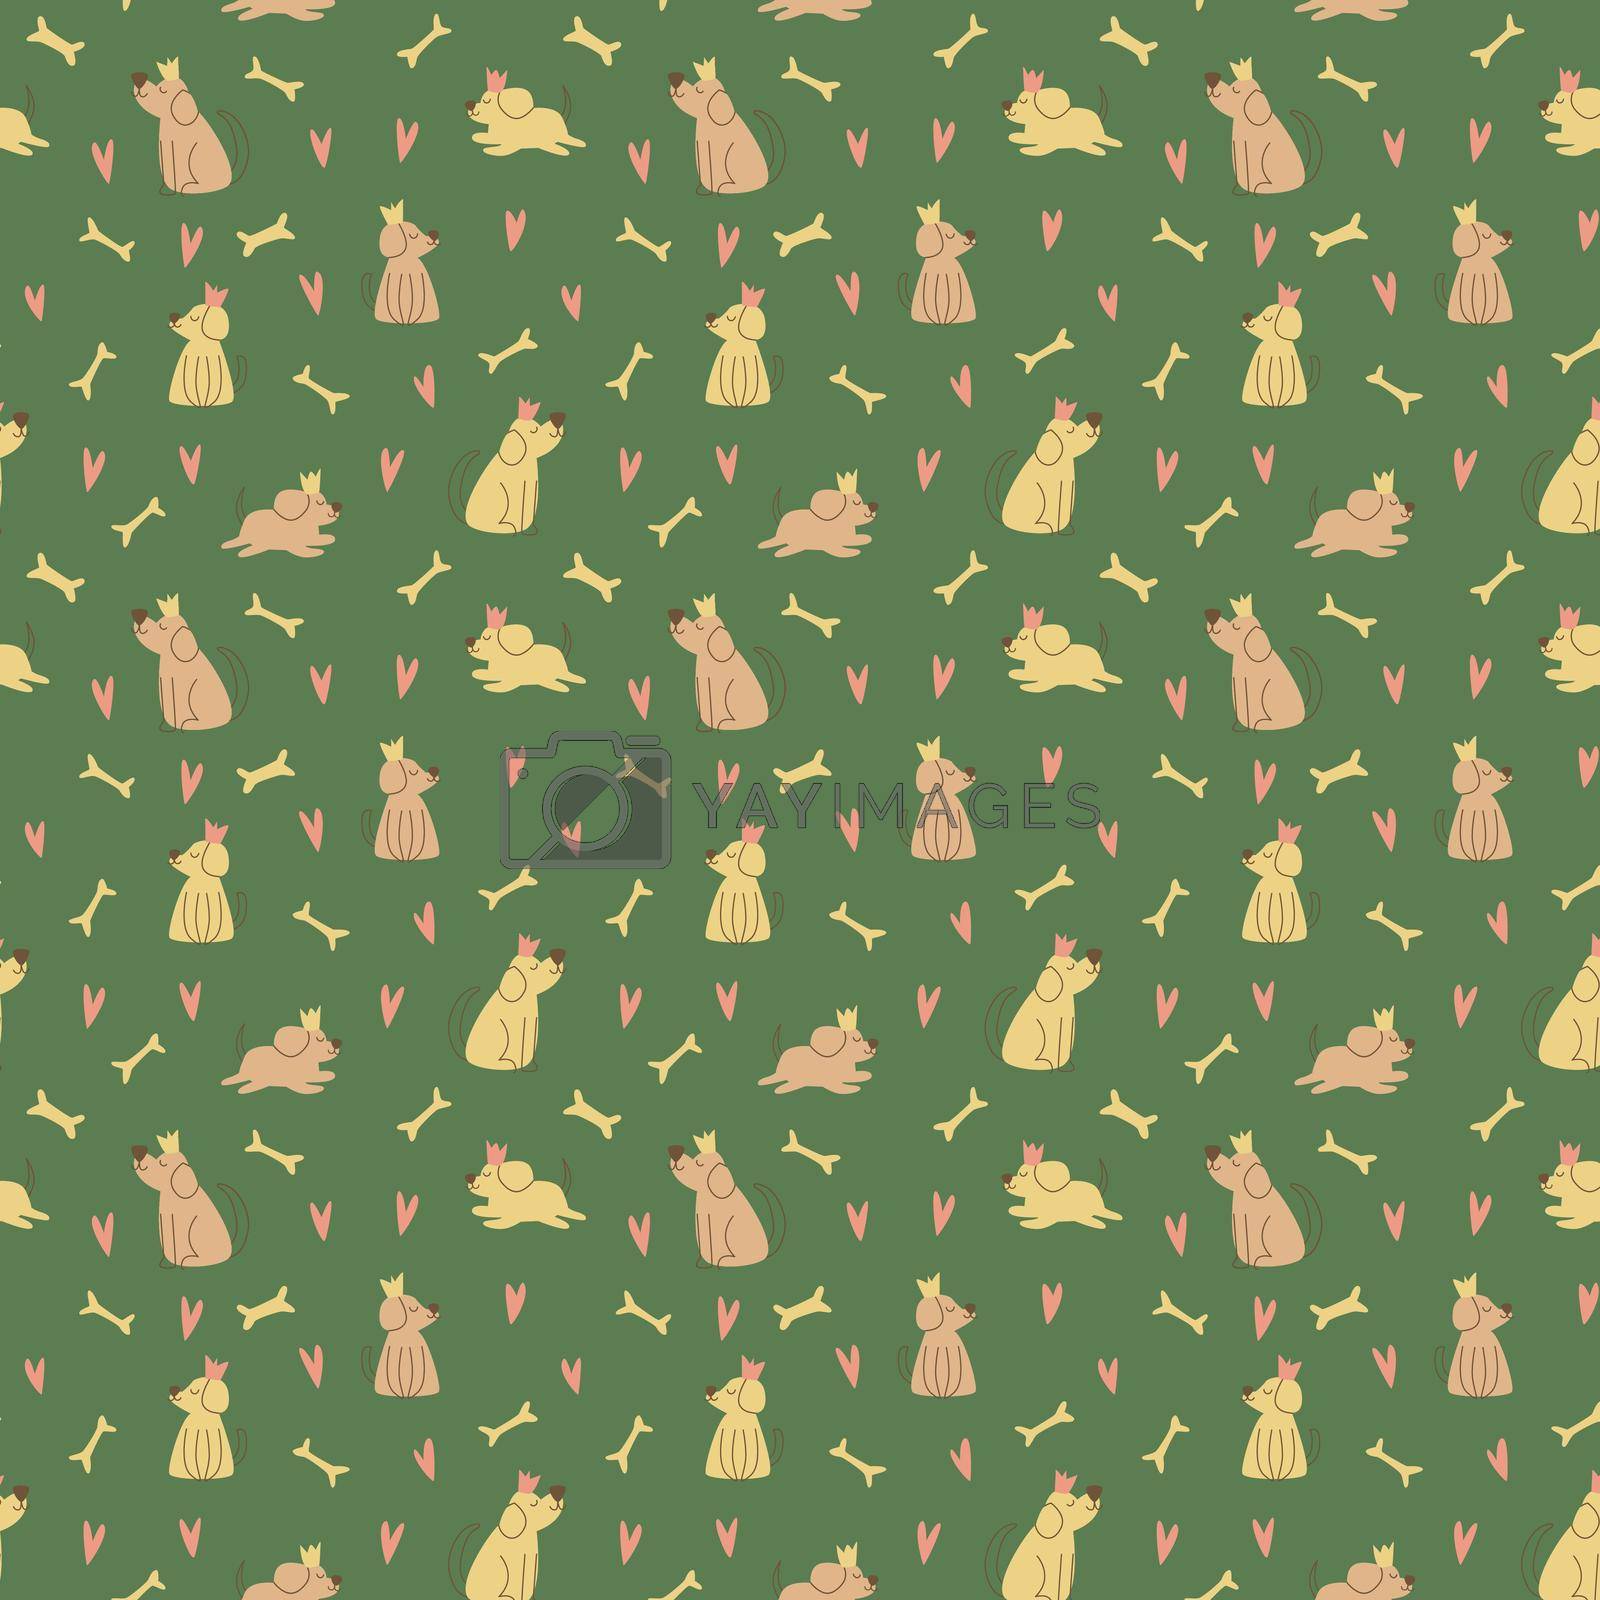 Vector seamless pattern. Cute dogs with crowns and bones. Pets, paws, ears, nose. Funny animals in cartoon style. Cheerful pets for printing in fabric and paper, social media posts and banners